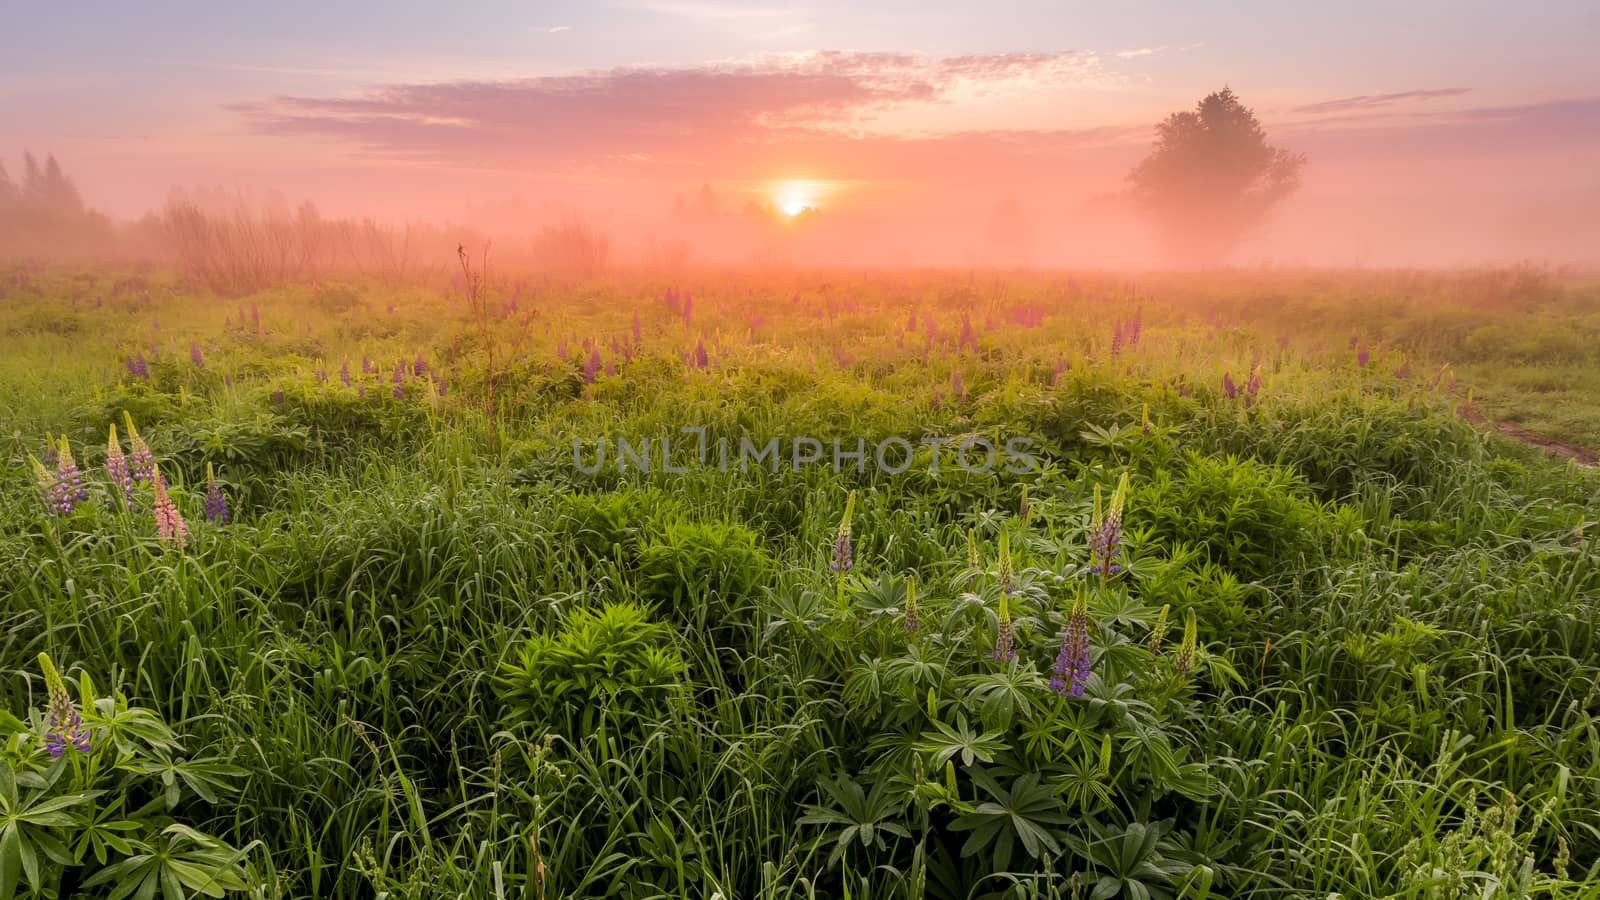 Sunrise on a field covered with flowering lupines in spring or early summer season with fog and trees on a background in morning. by Eugene_Yemelyanov